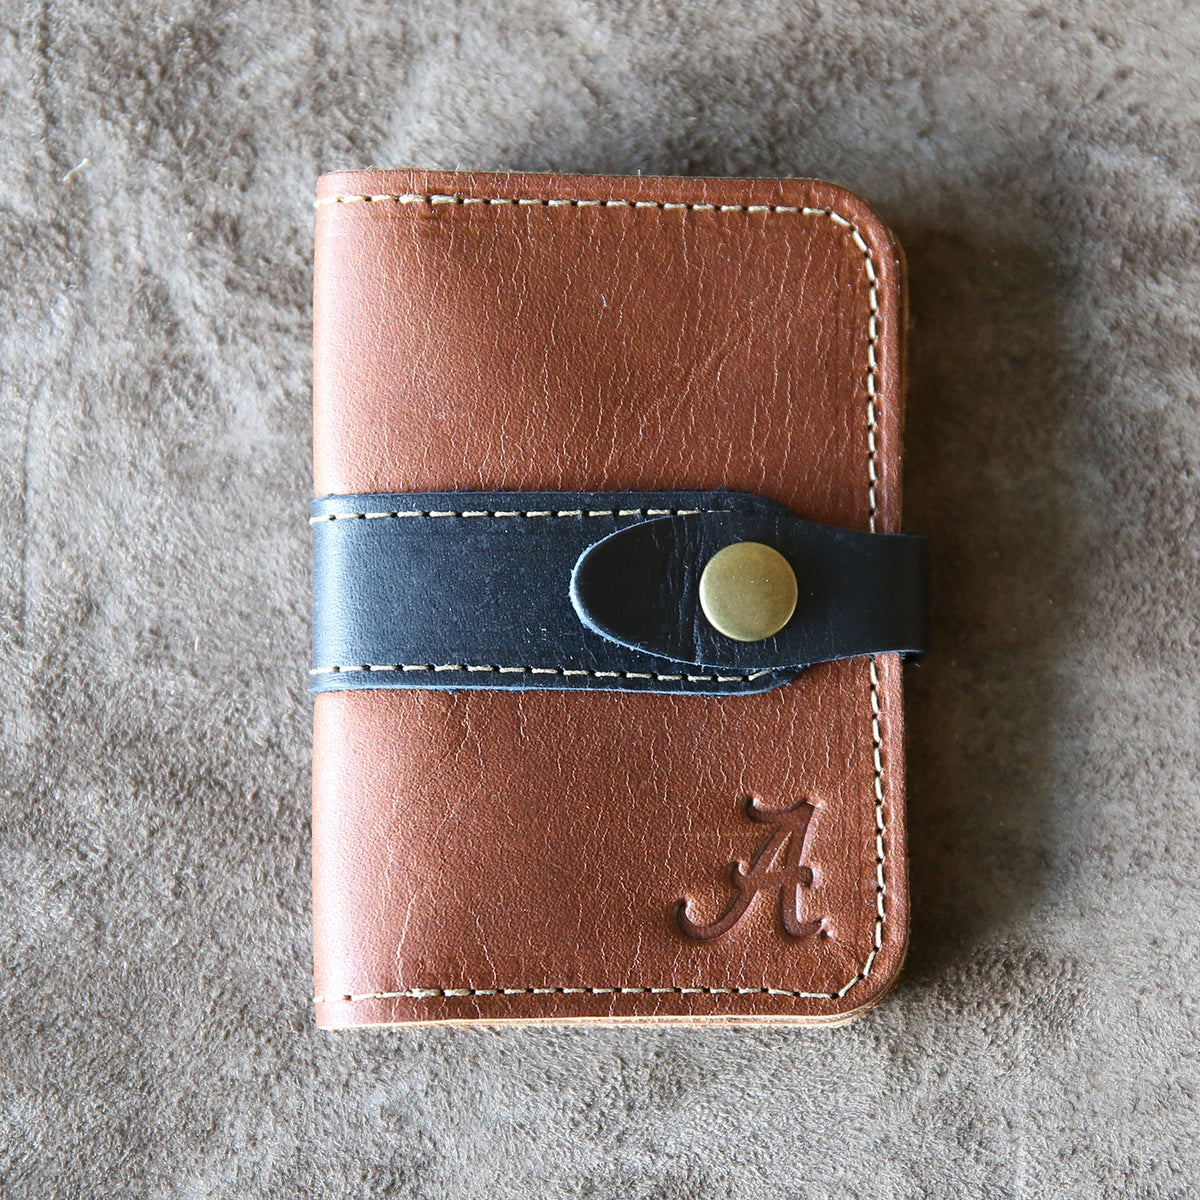 The Officially Licensed Alabama Doolittle Fine Leather Snap Closure Wallet BiFold